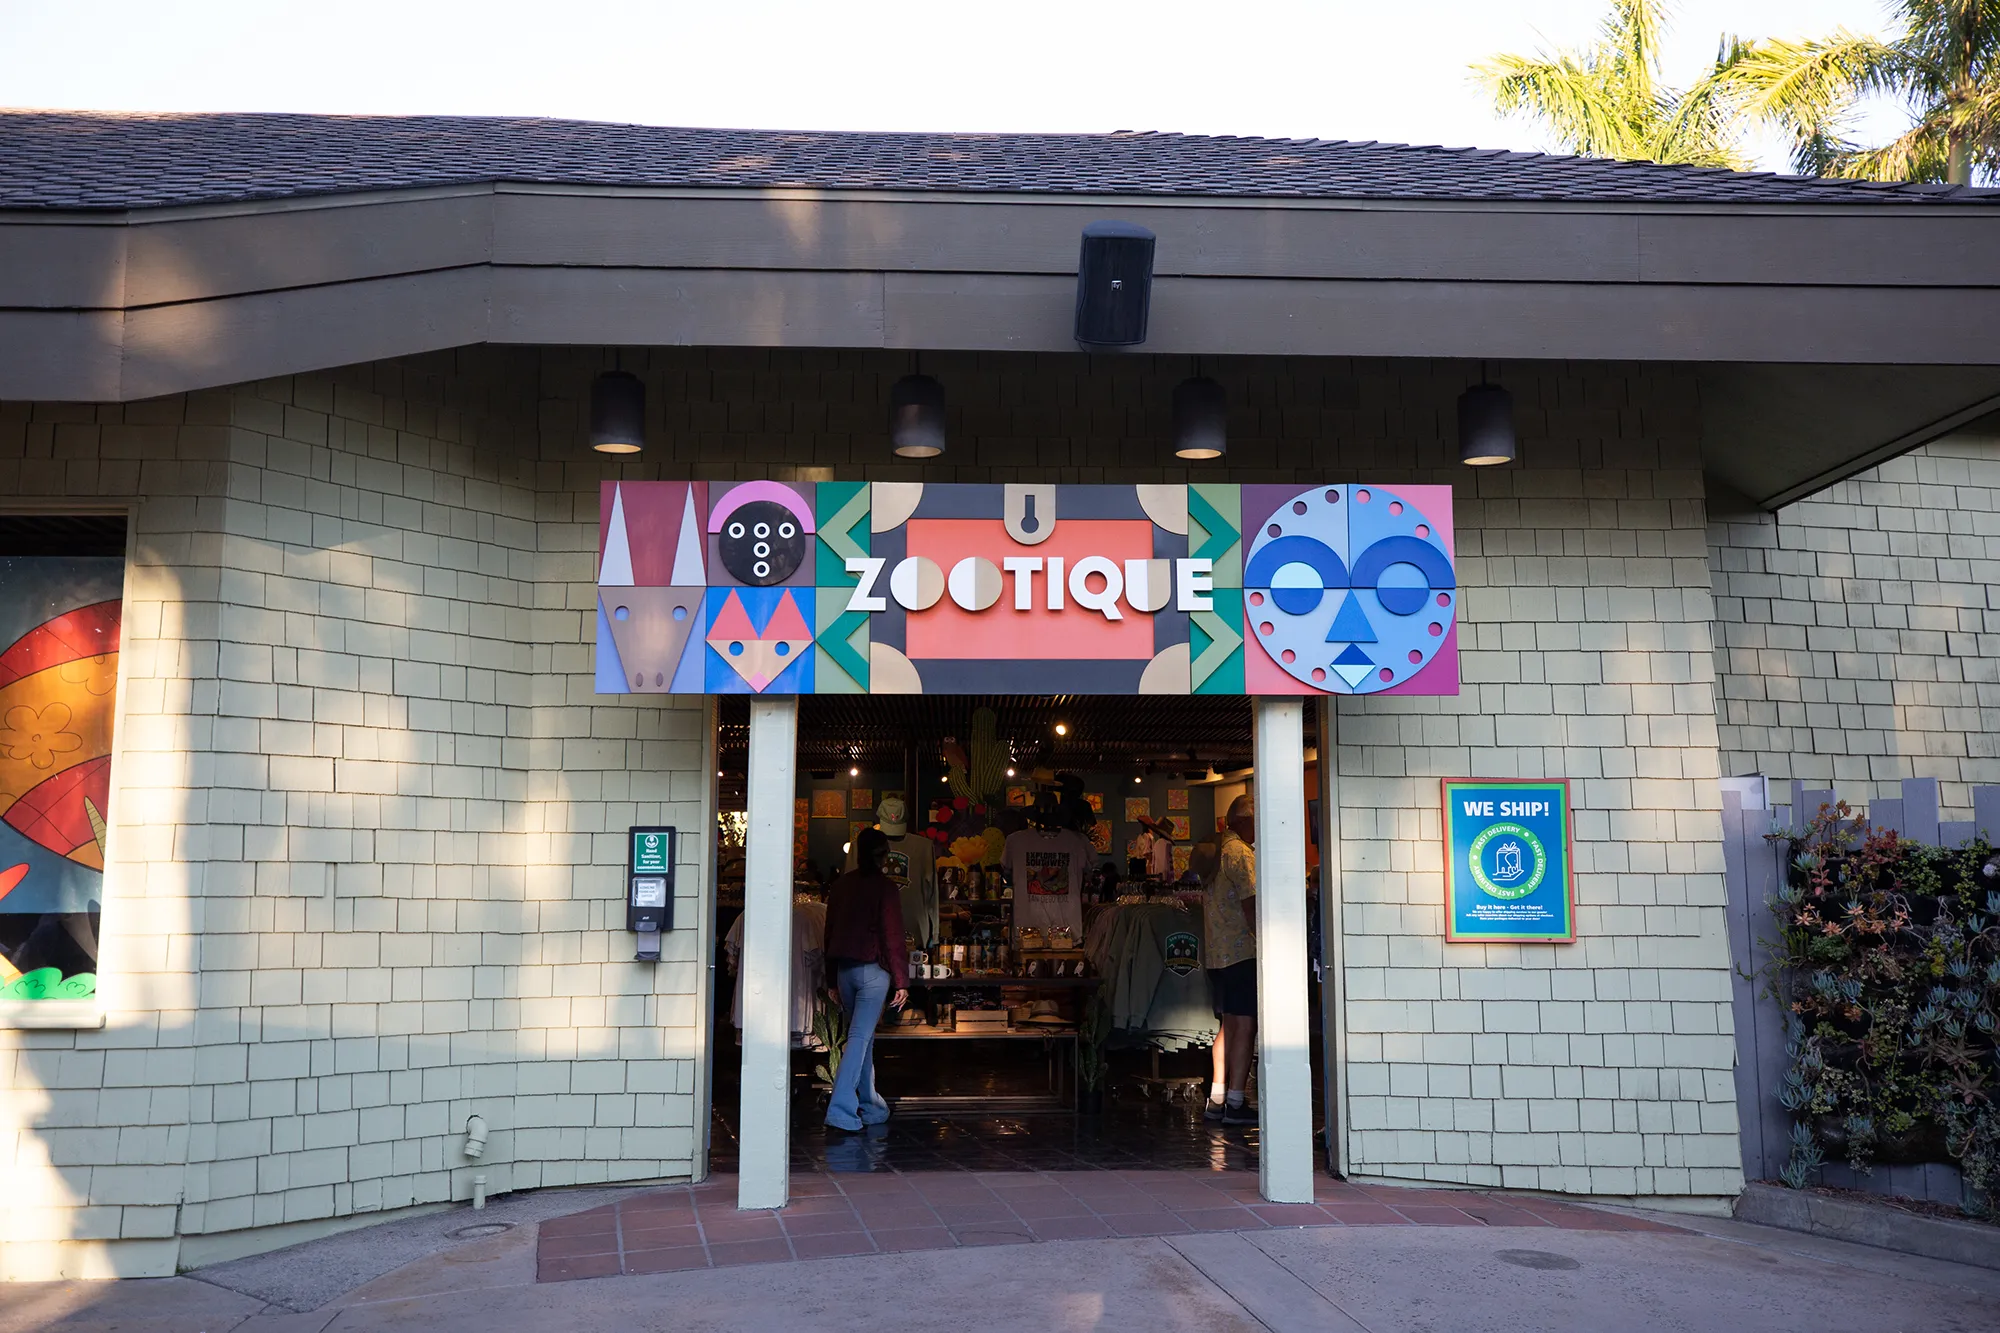 Entrance to the Zootique giftshop. A Zootique sign with colorful shapes is above the entry way. The building is white brick with a brown roof top.